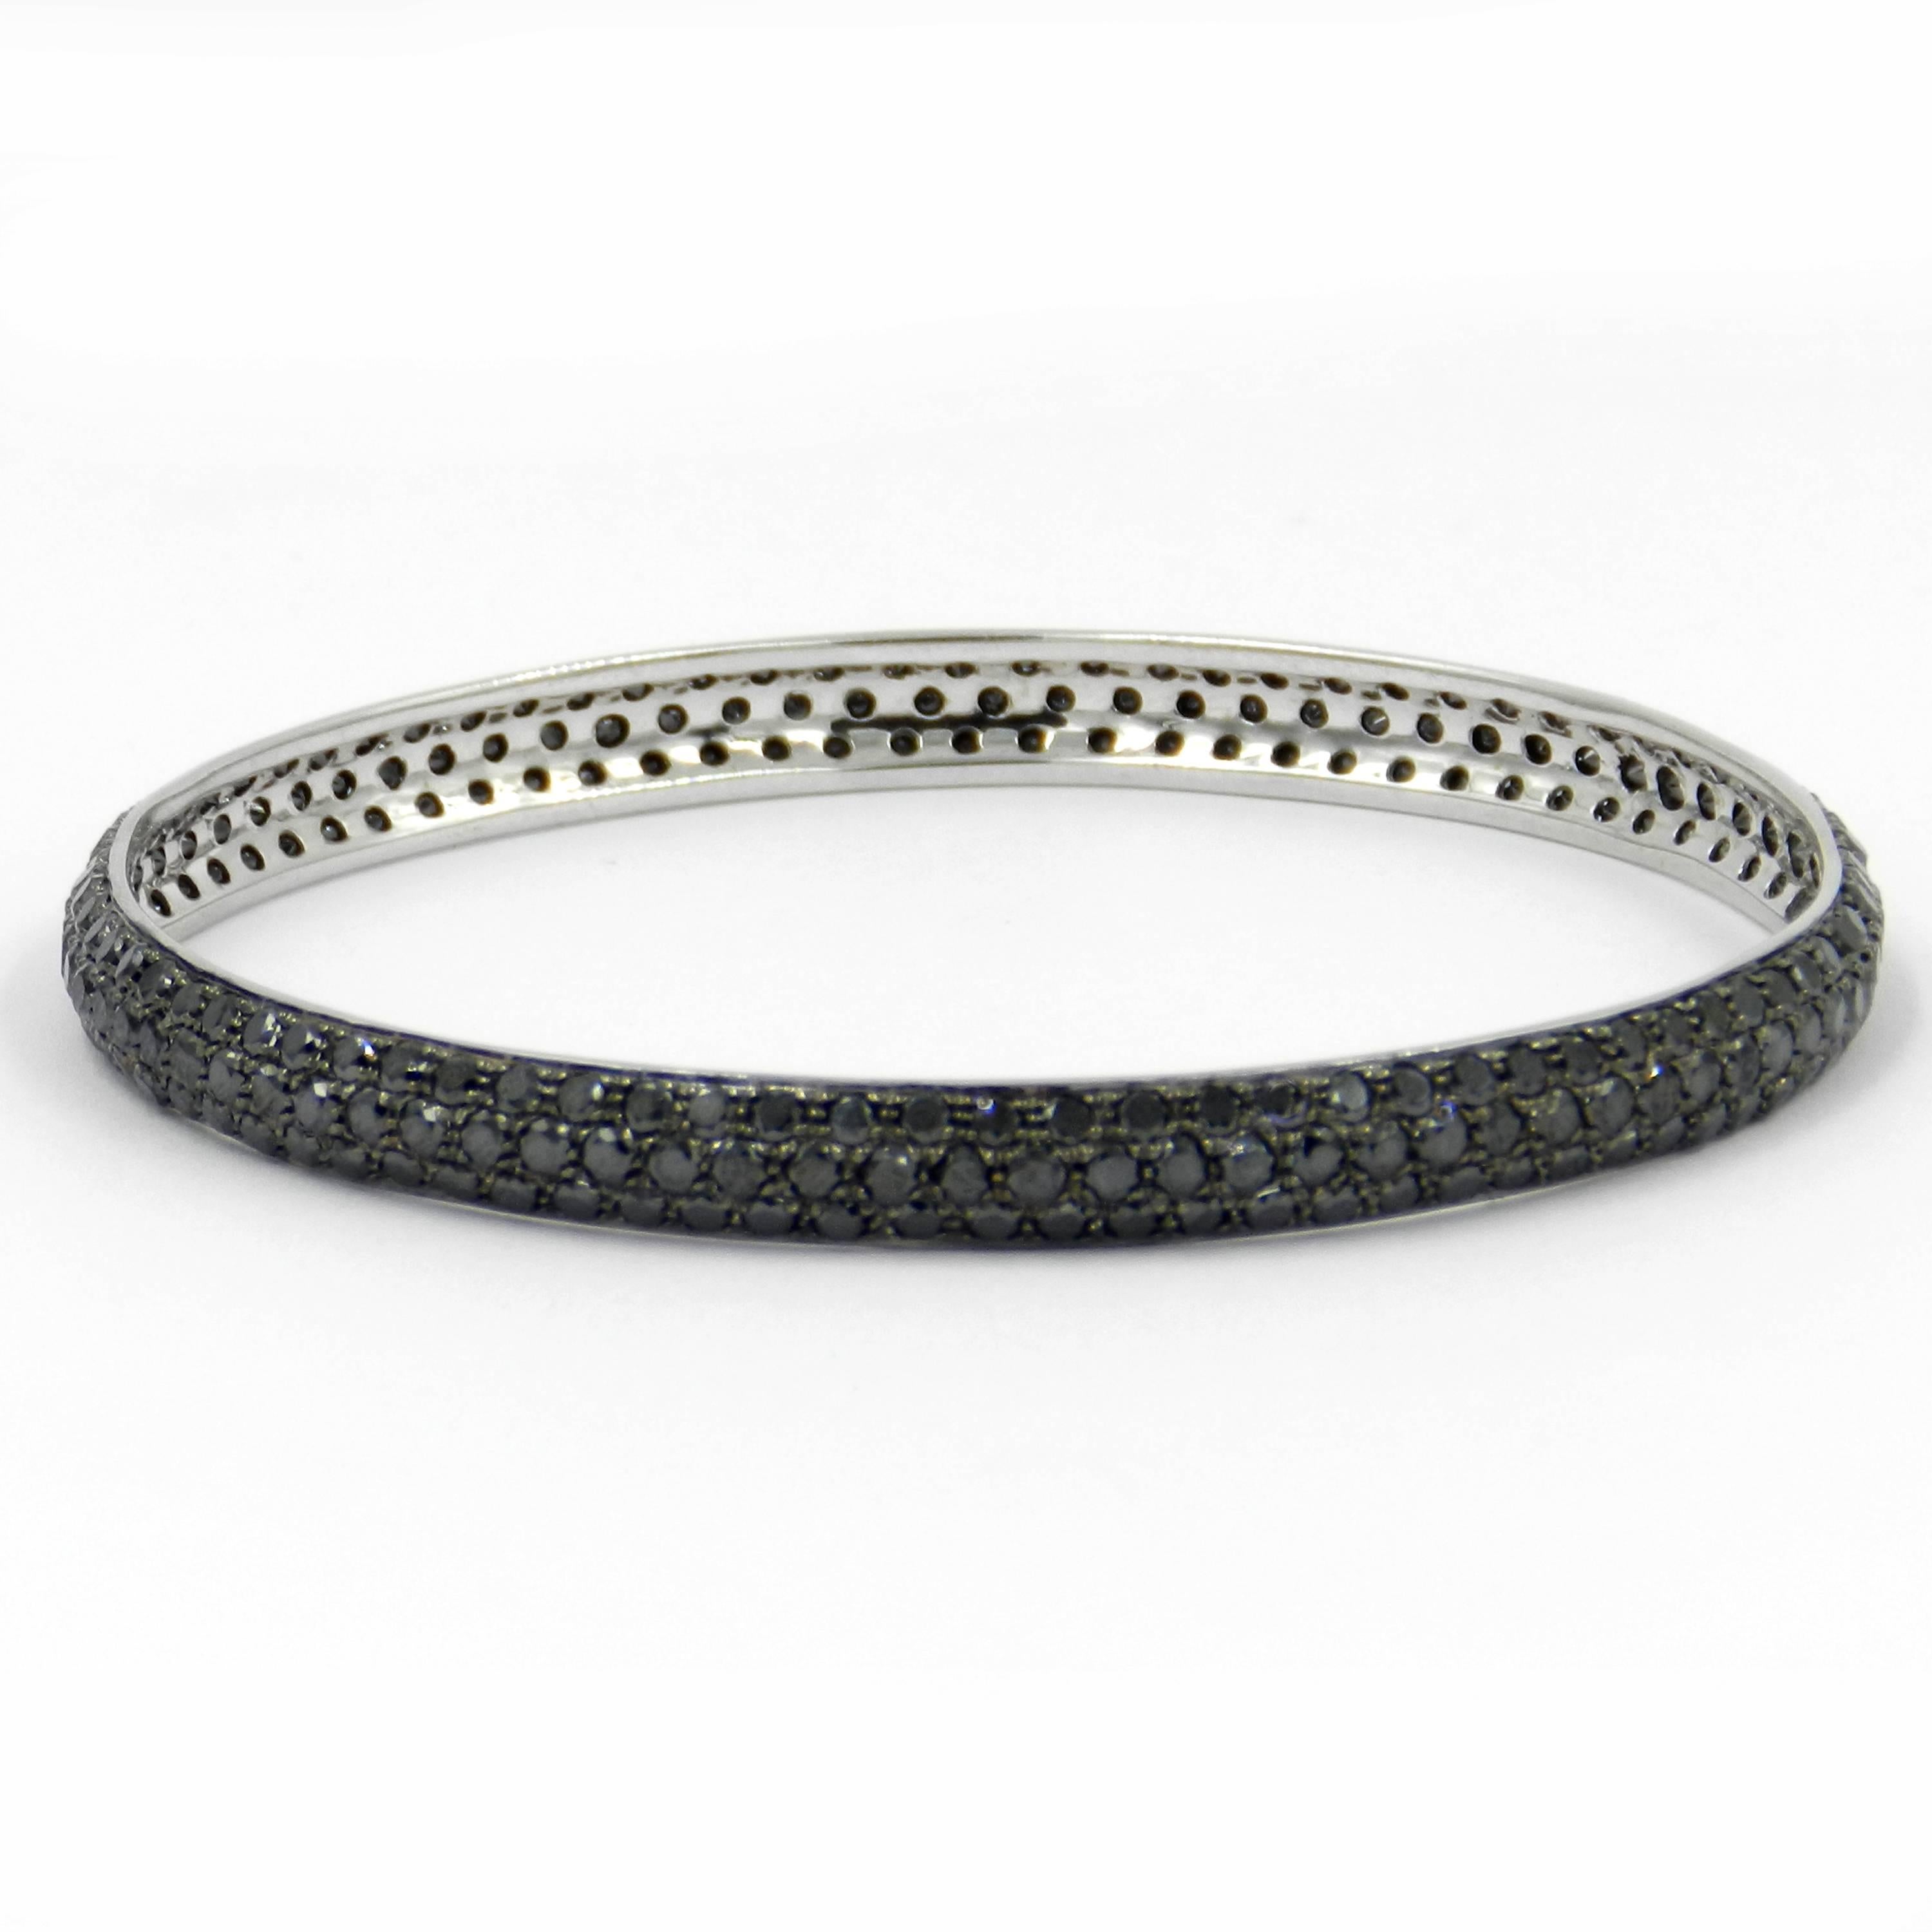 18KT White Gold Three Rows of Pavè Black Diamonds BRACELET 
Three perfect rows of full cut black diamonds.
Bangle Slip On - Diameter  MM  65 
18kt GOLD  : 15,70
BLACK DIAMONDS total ct : 10,76
The white diamonds version is also available for a